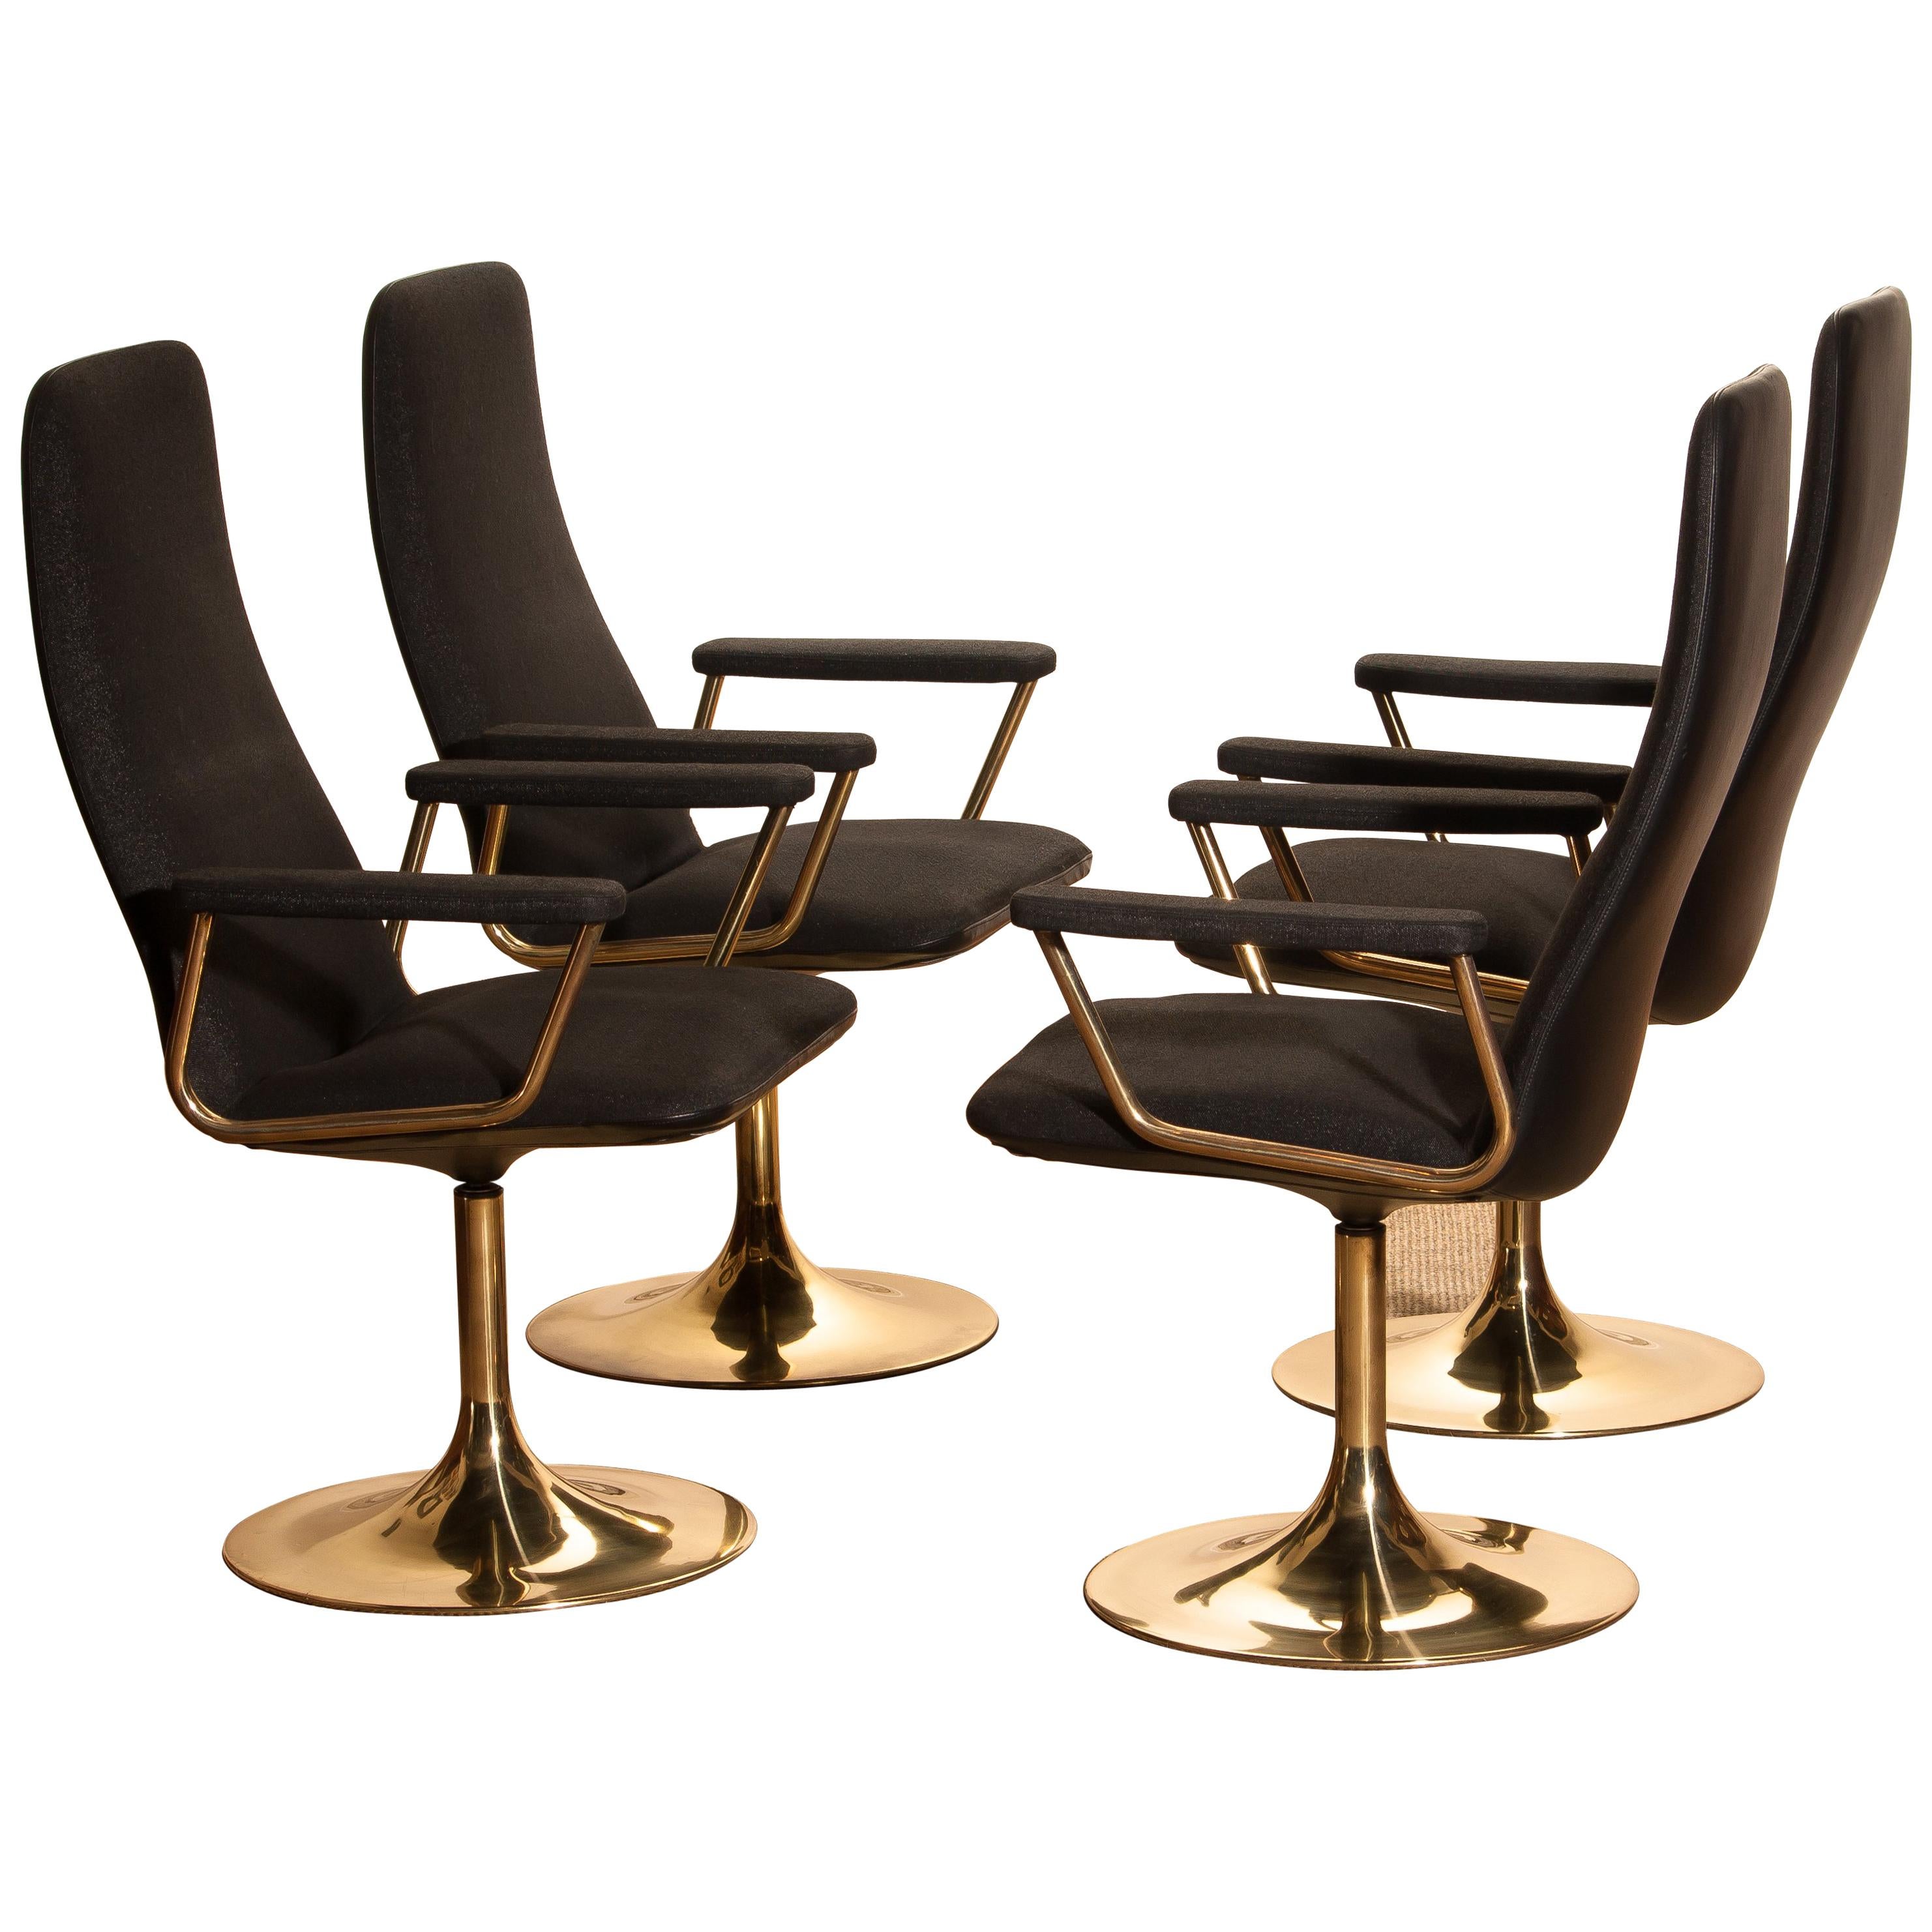 Four Golden, with Black Fabric, Armrest Swivel Chairs by Johanson Design, 1970